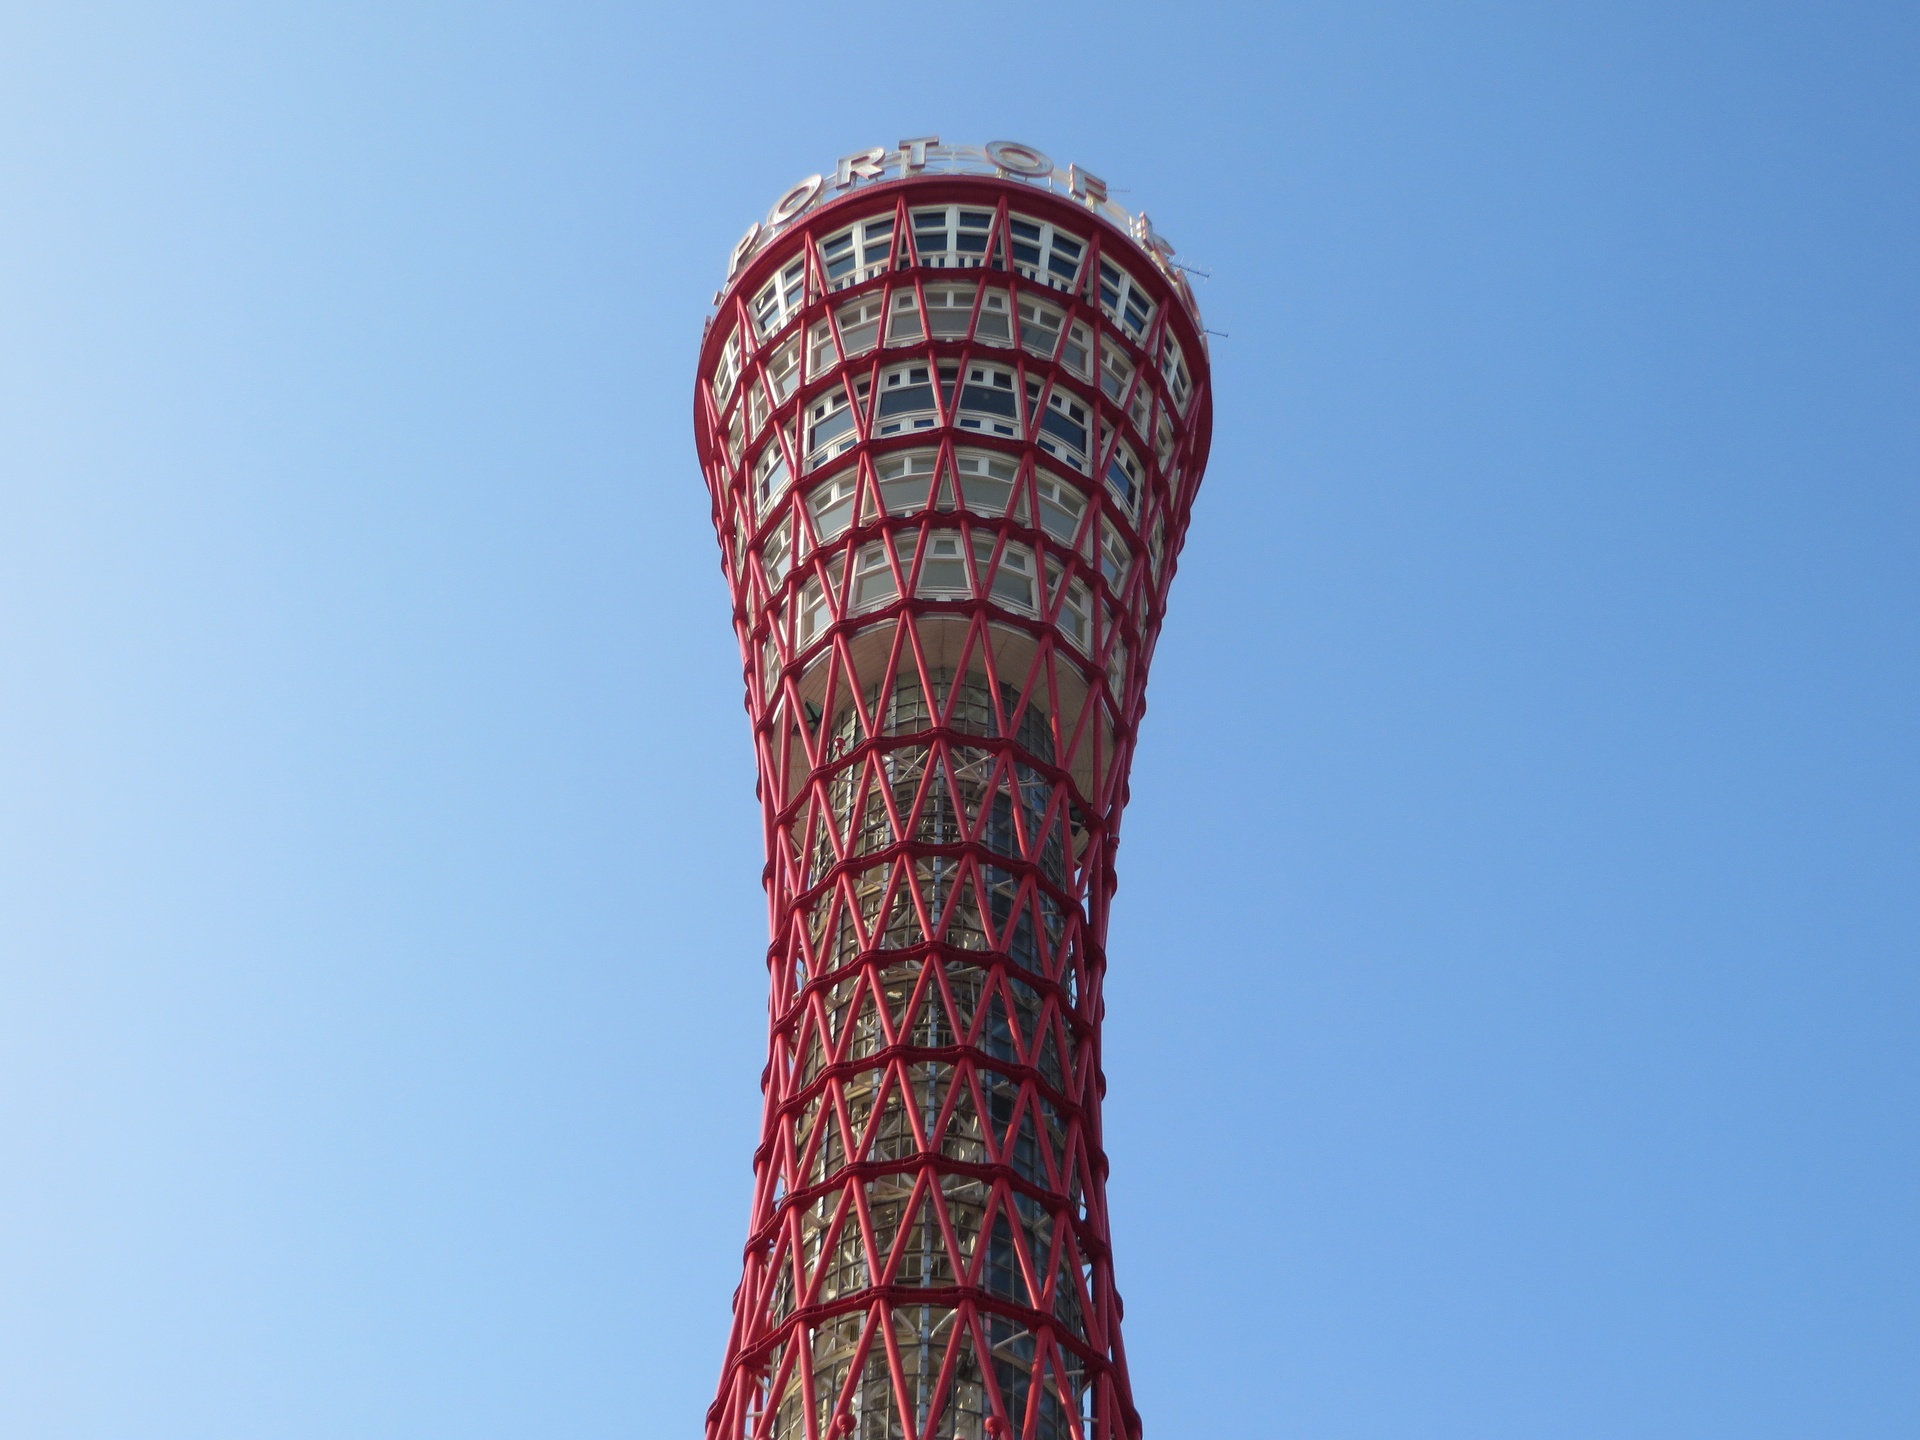 Upward view of the Port of Japan tower with a red net-like exterior